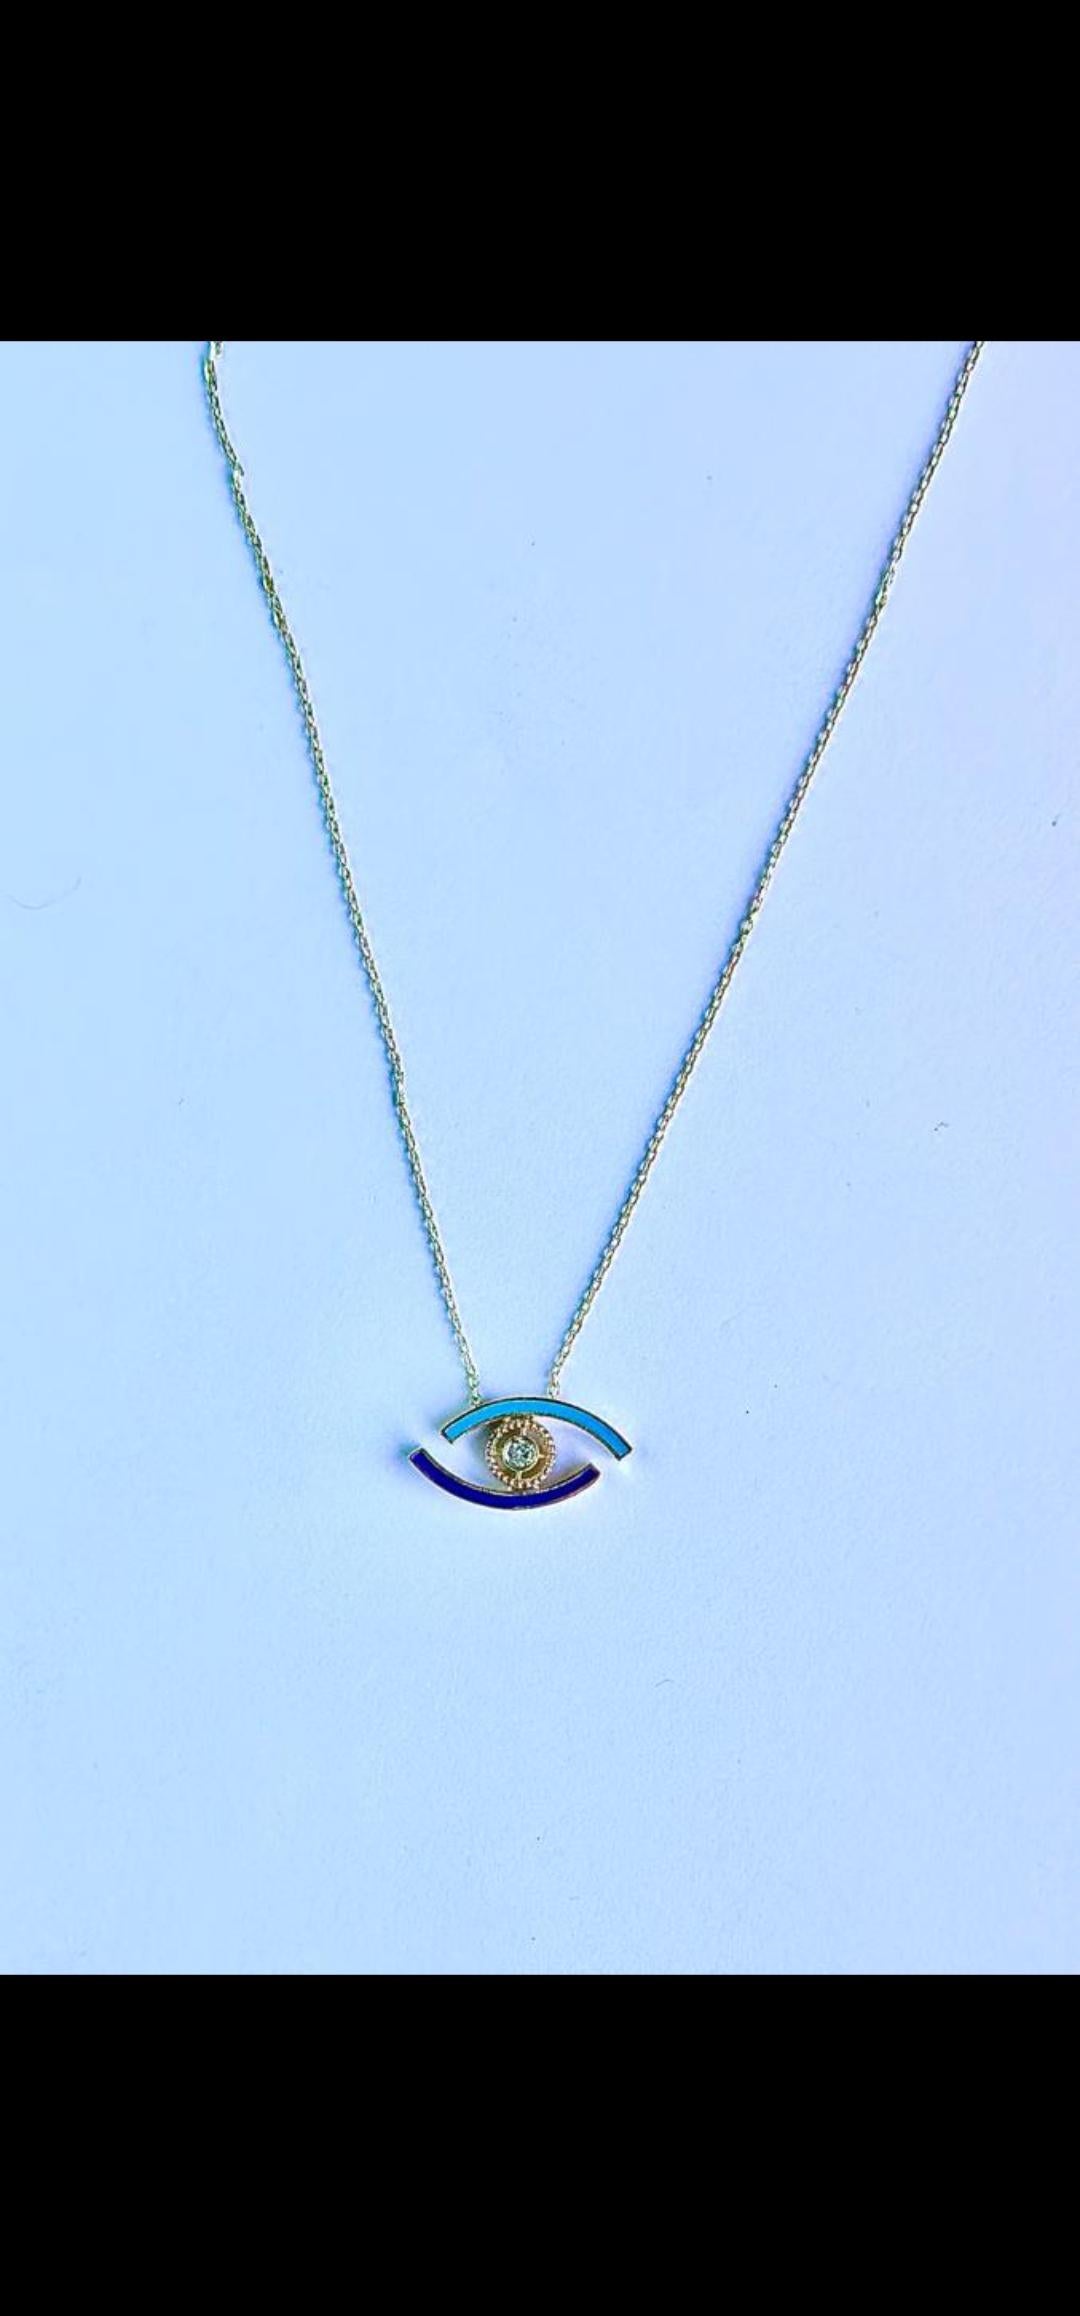 the eye necklace meaning